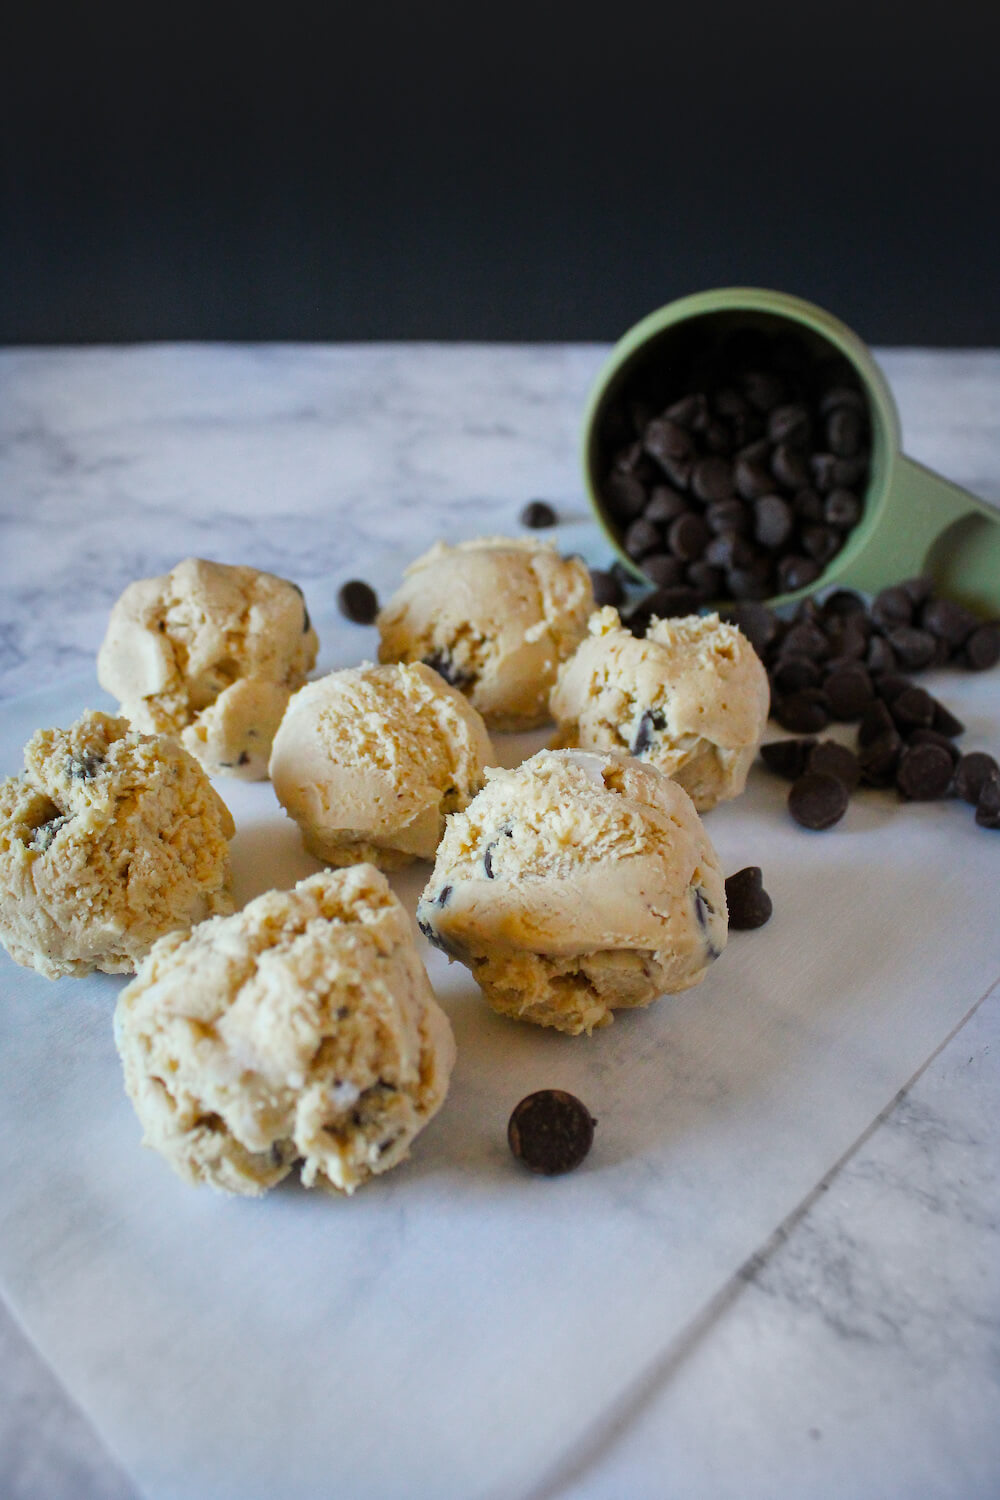 Finished edible keto cookie dough balls